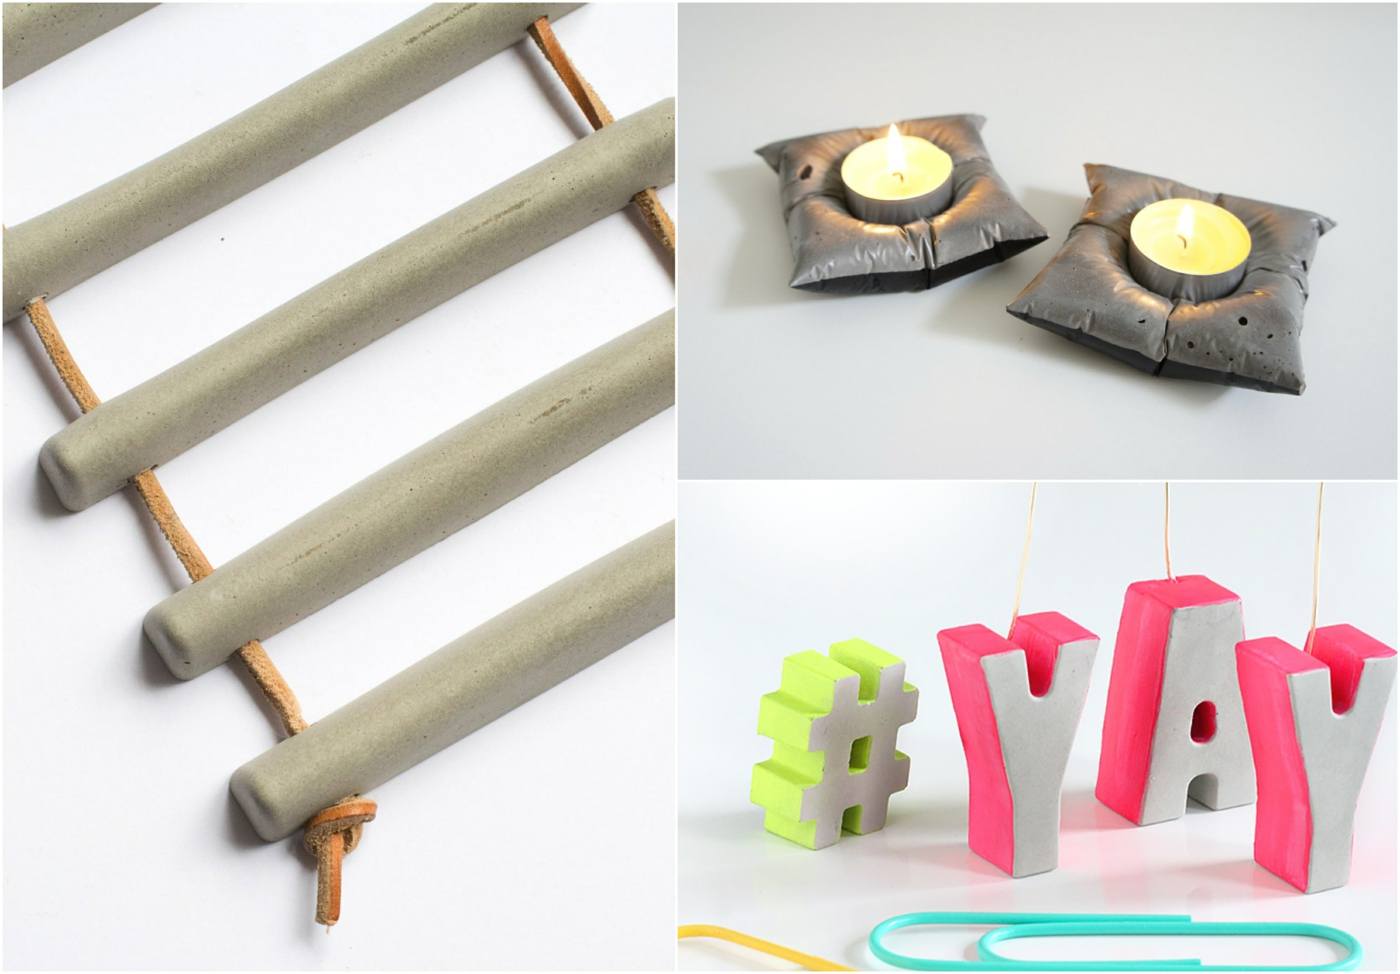 Crafting ideas with concrete - subsets, candle holders and photo booths